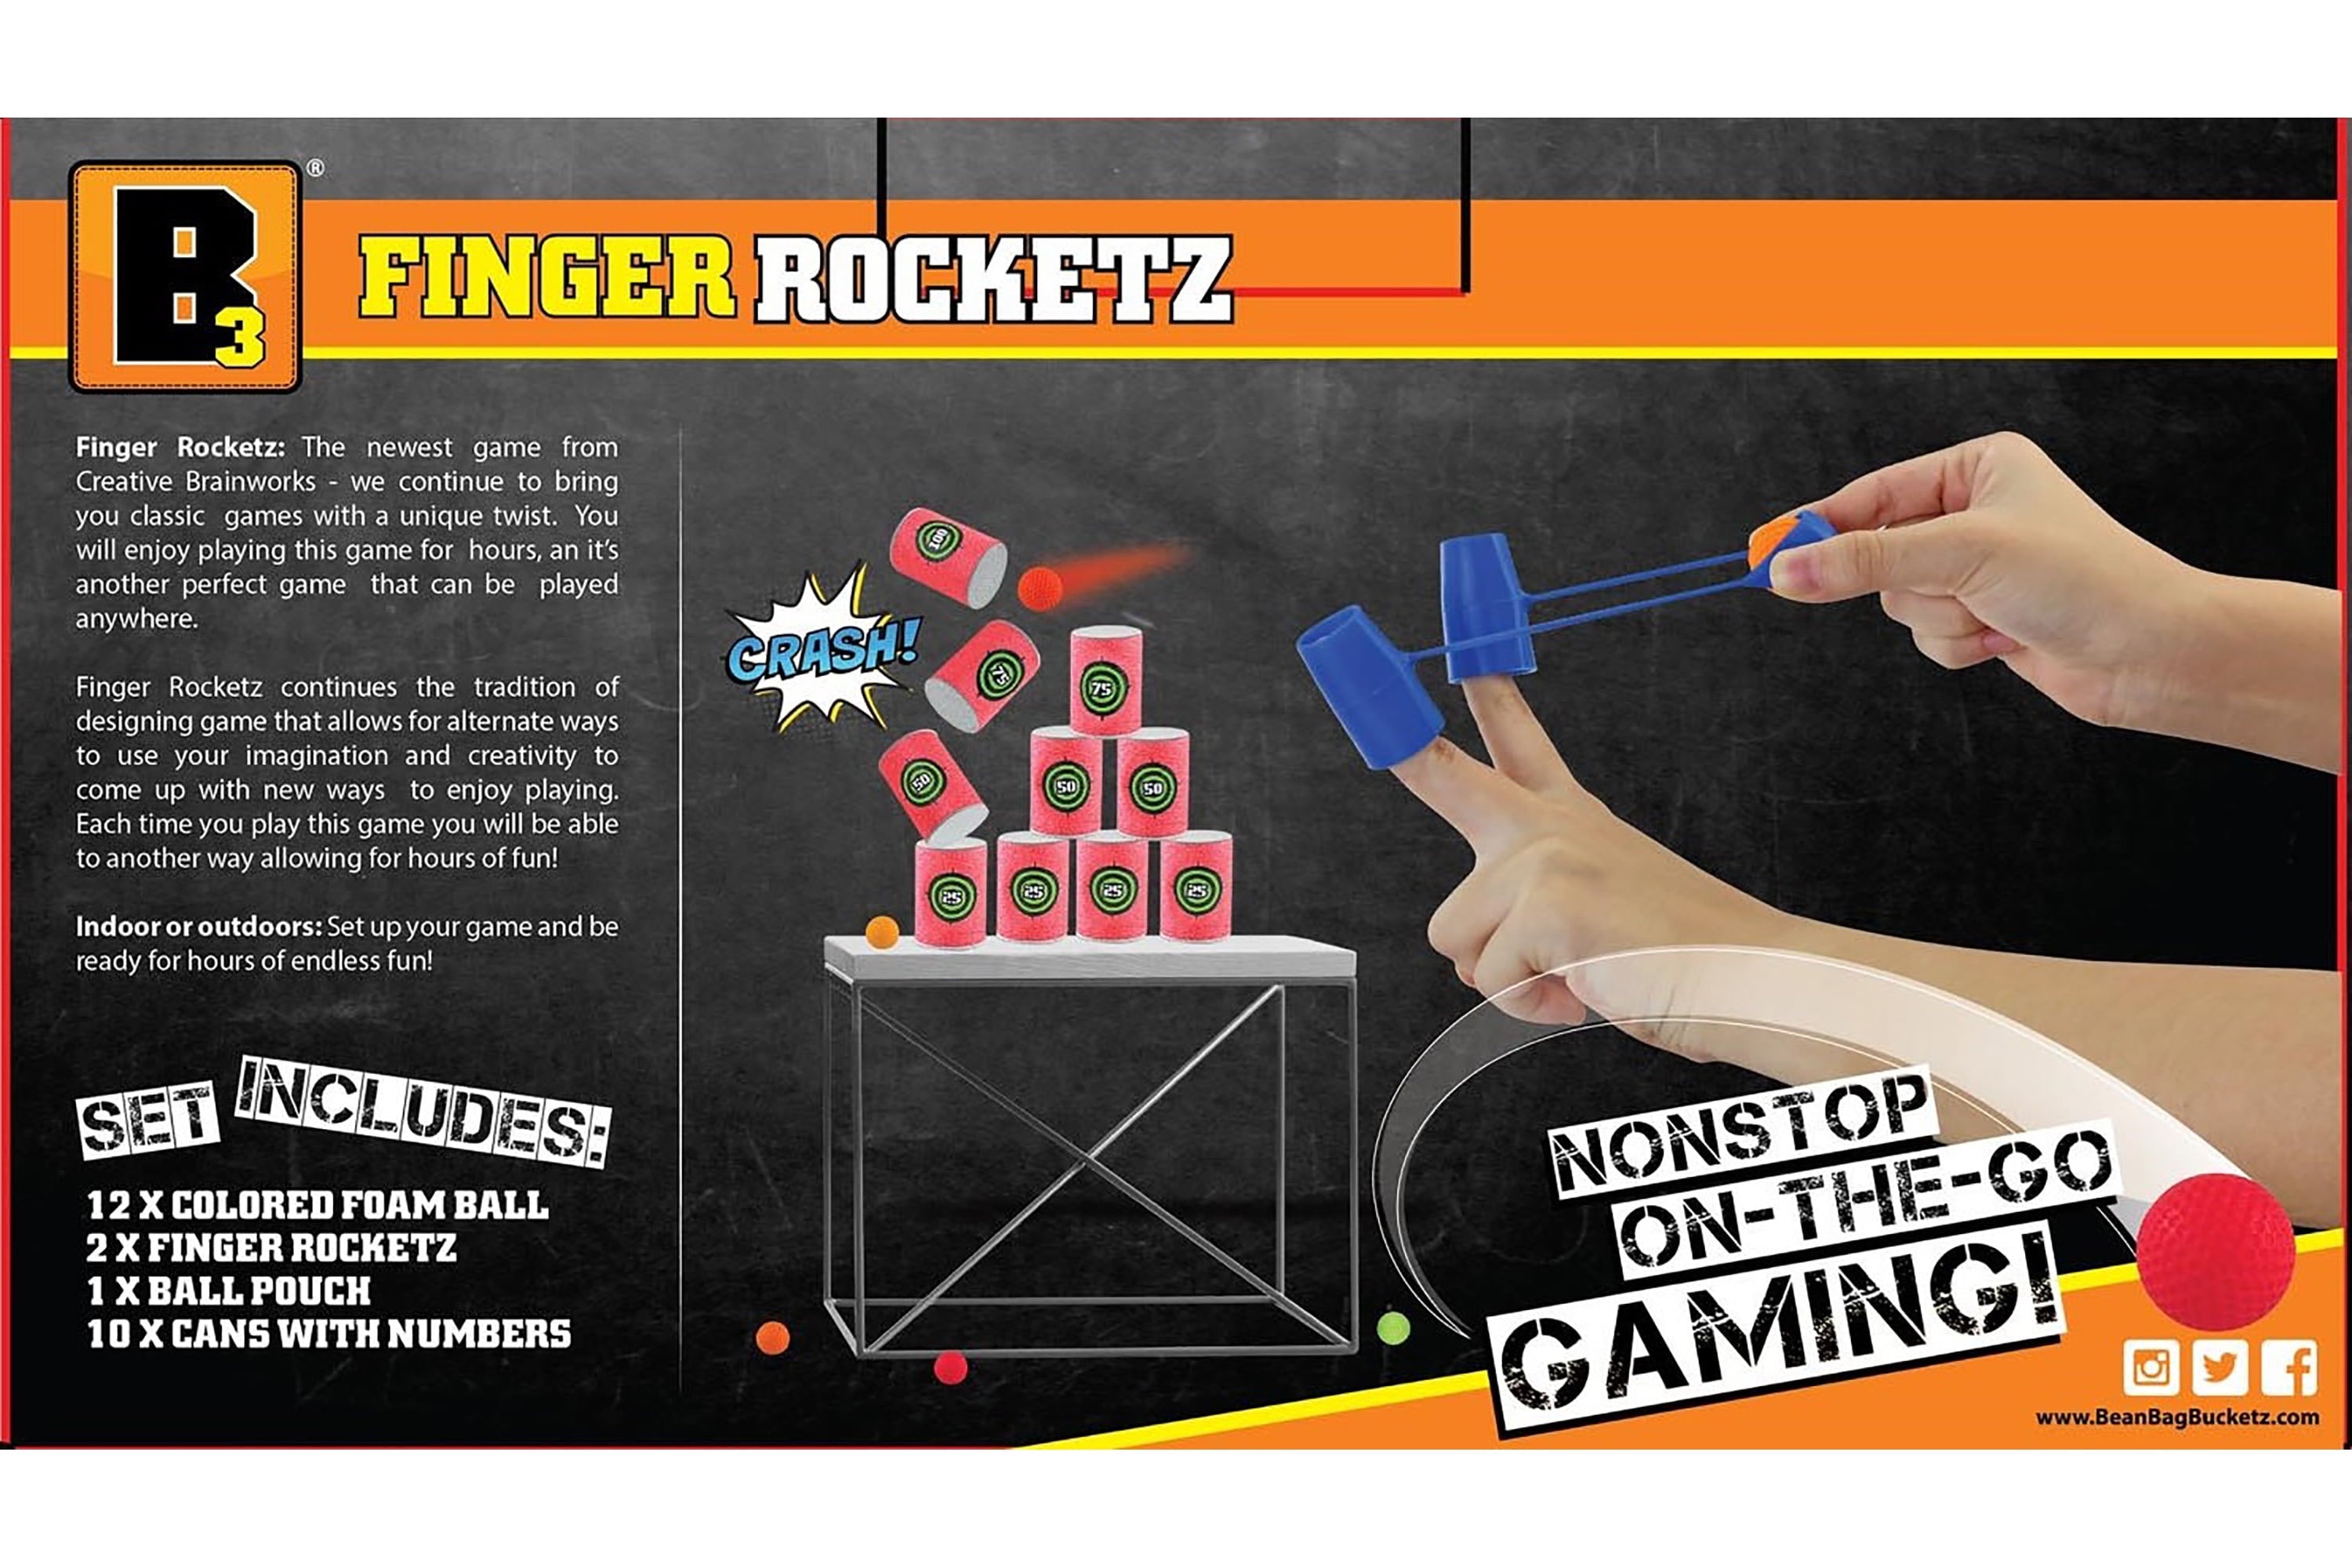 Creative Brainworks Finger Rocketz, Includes 2 Finger Creative Brainworks Sling rocketz, 12 Foam Balls, 10 Foam cans for Targets, 1 Carry Pouch